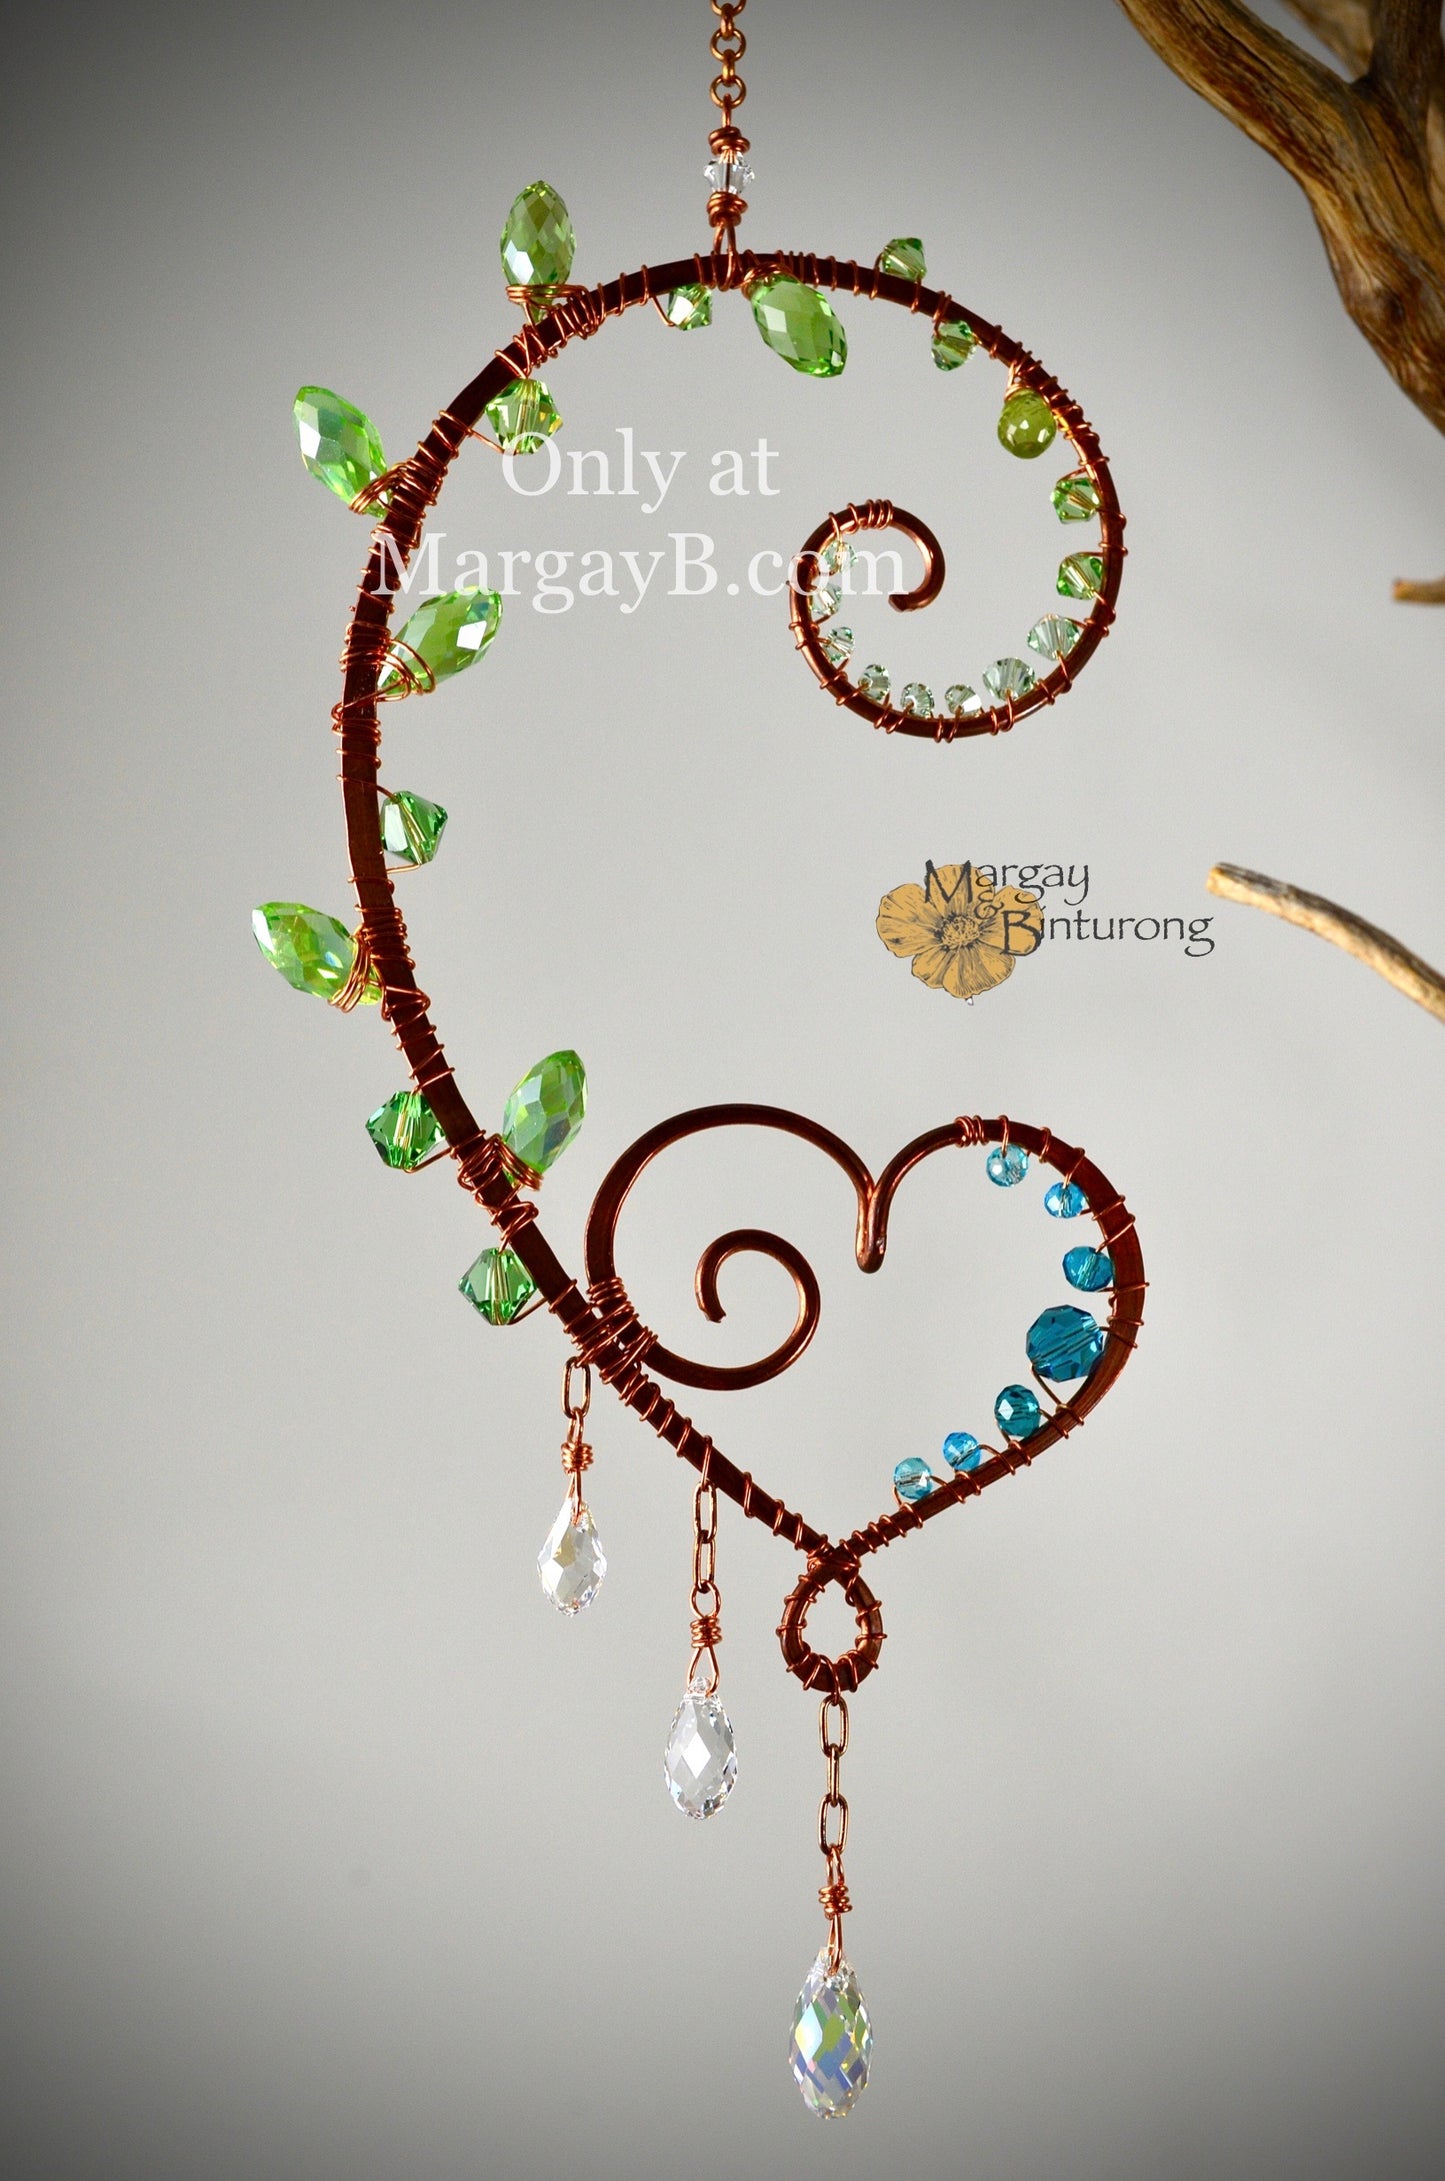 Handmade Curling Fern Mini Suncatcher Featuring Wire-Wrapped Crystal Prisms